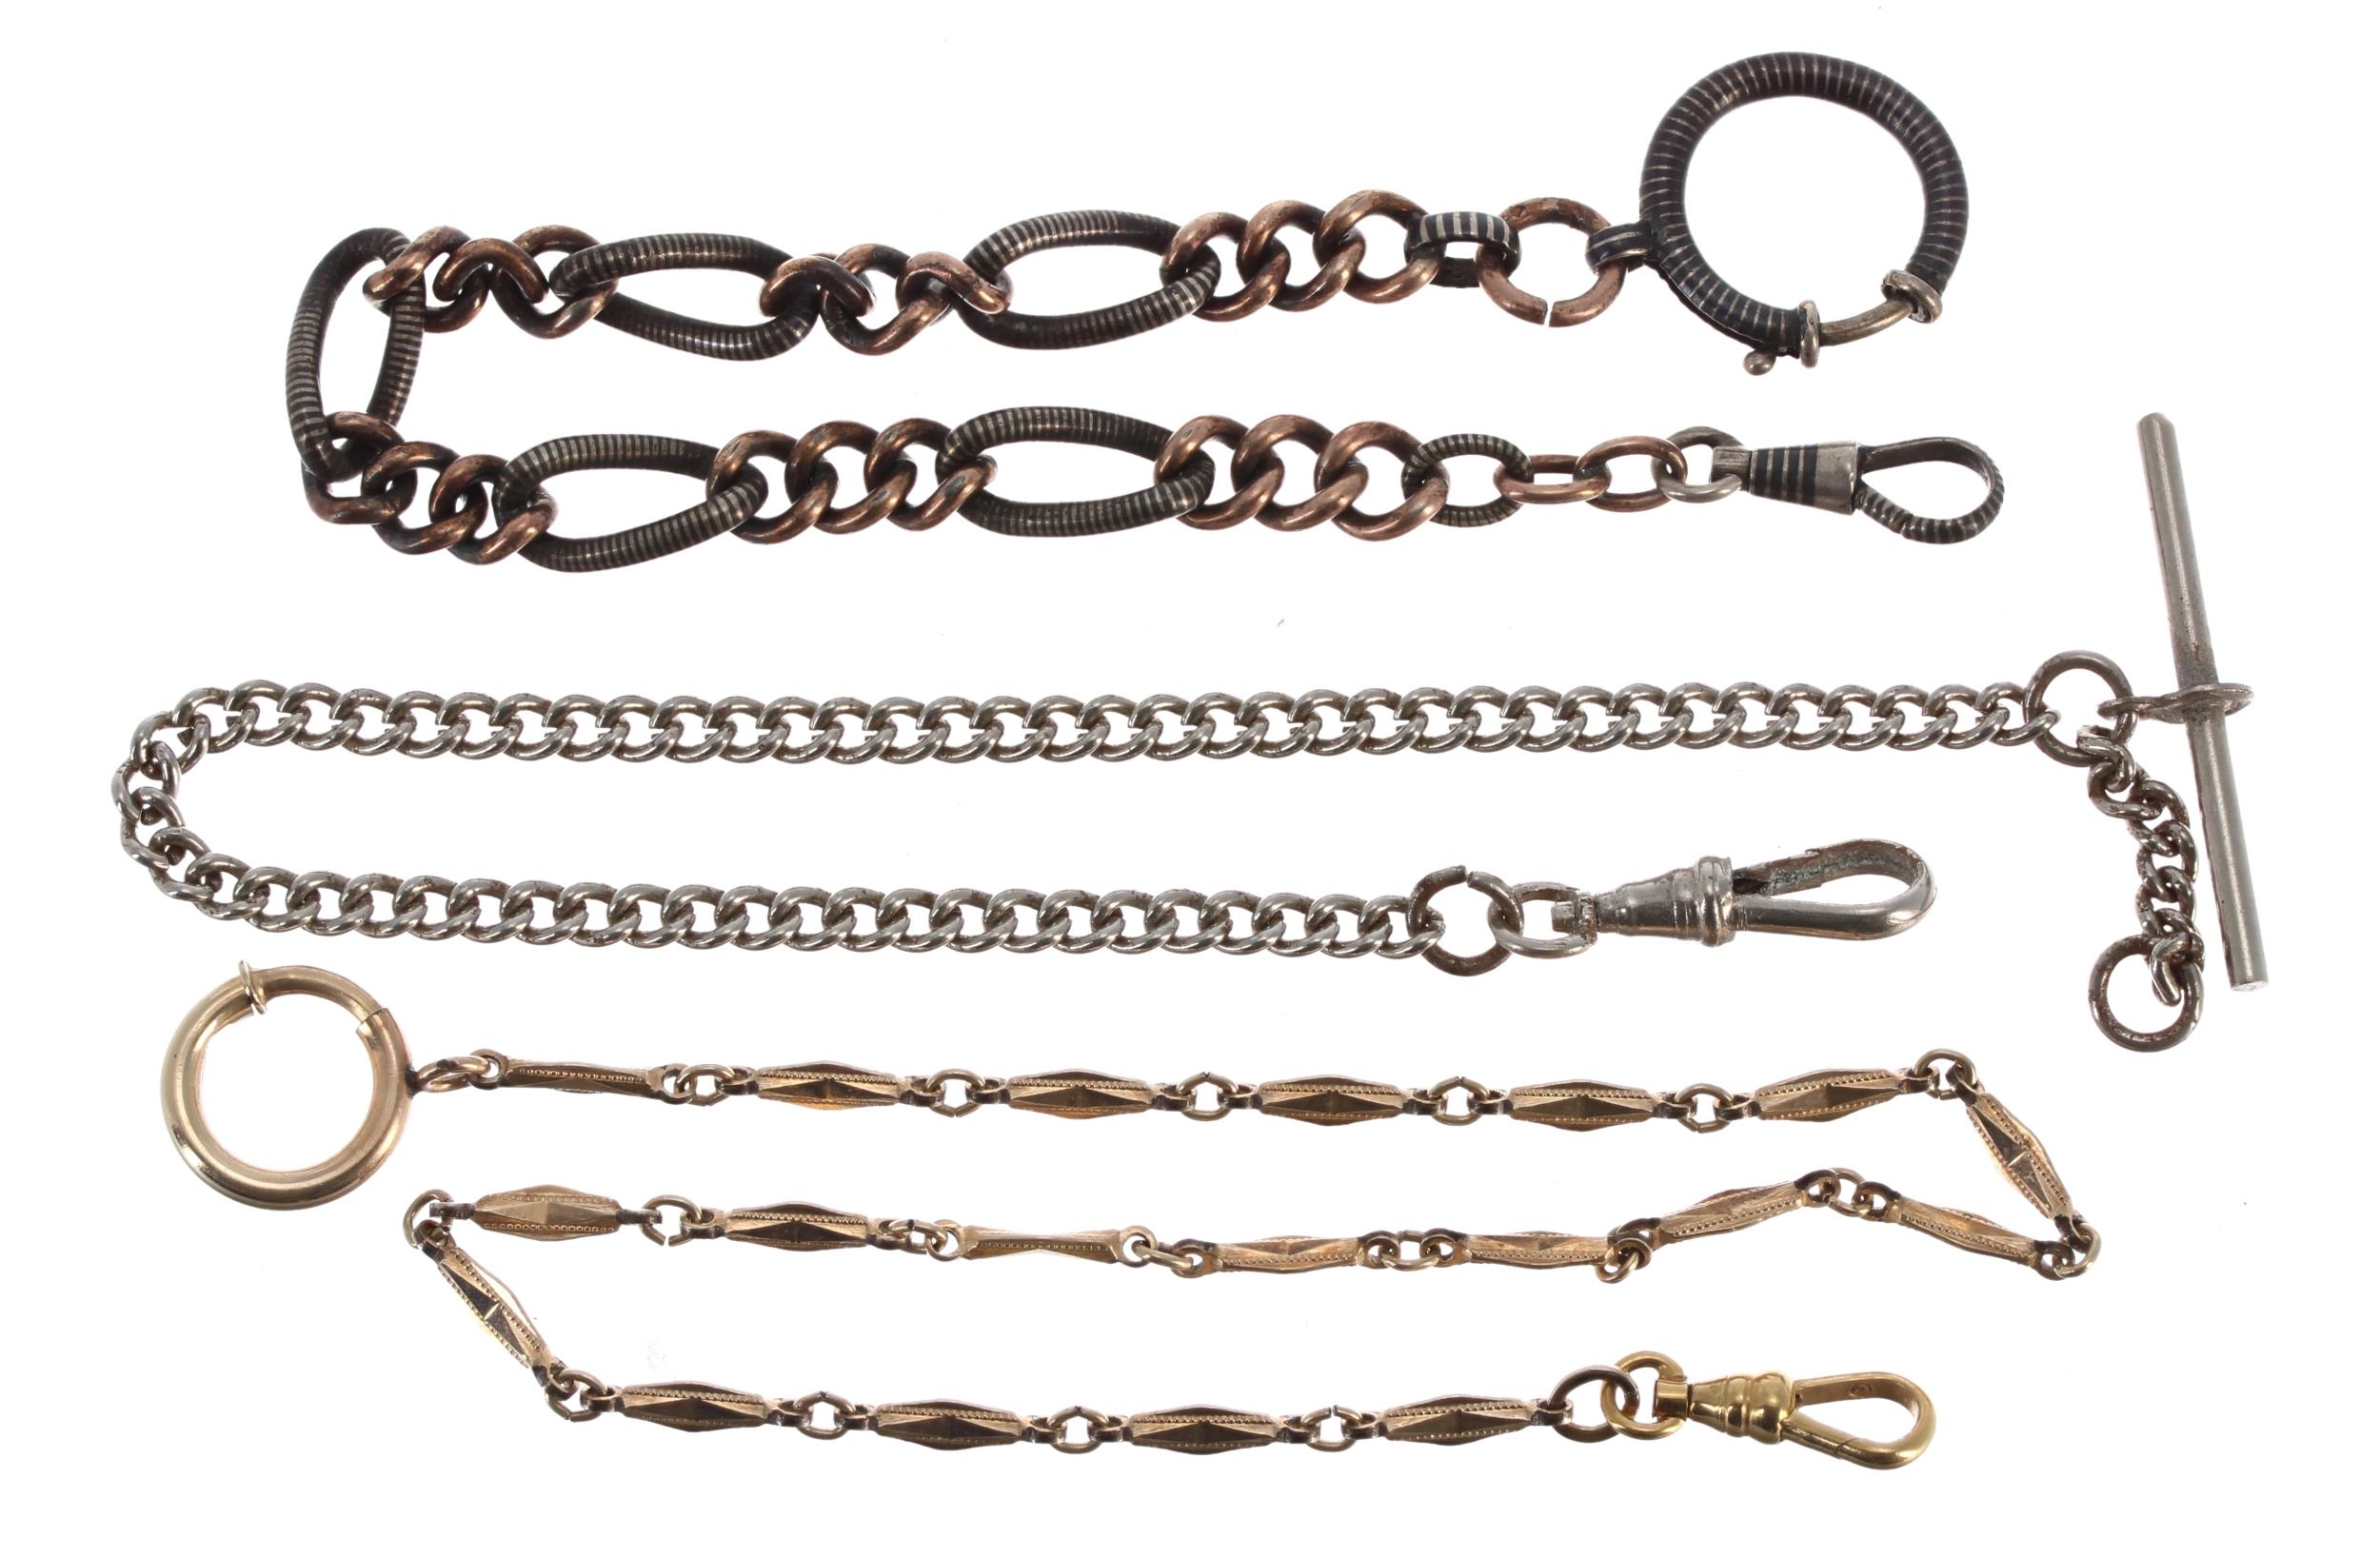 Gilt metal link pocket watch chain with loop and clasp, 14' long approx; together with a curb link